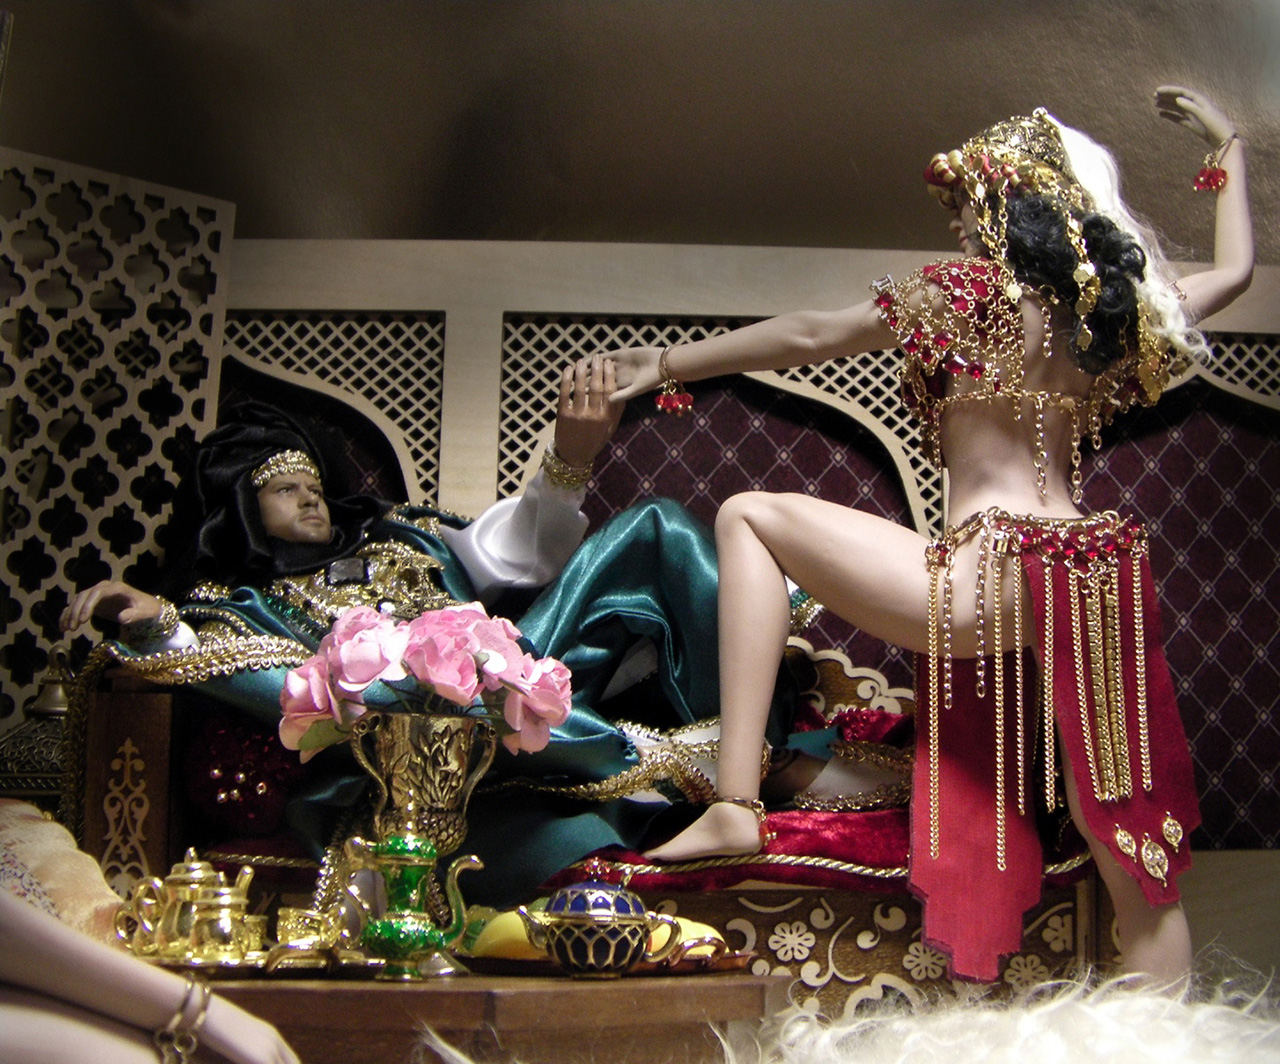 Dioramas and Vignettes: Sultan and odalisques, photo #2